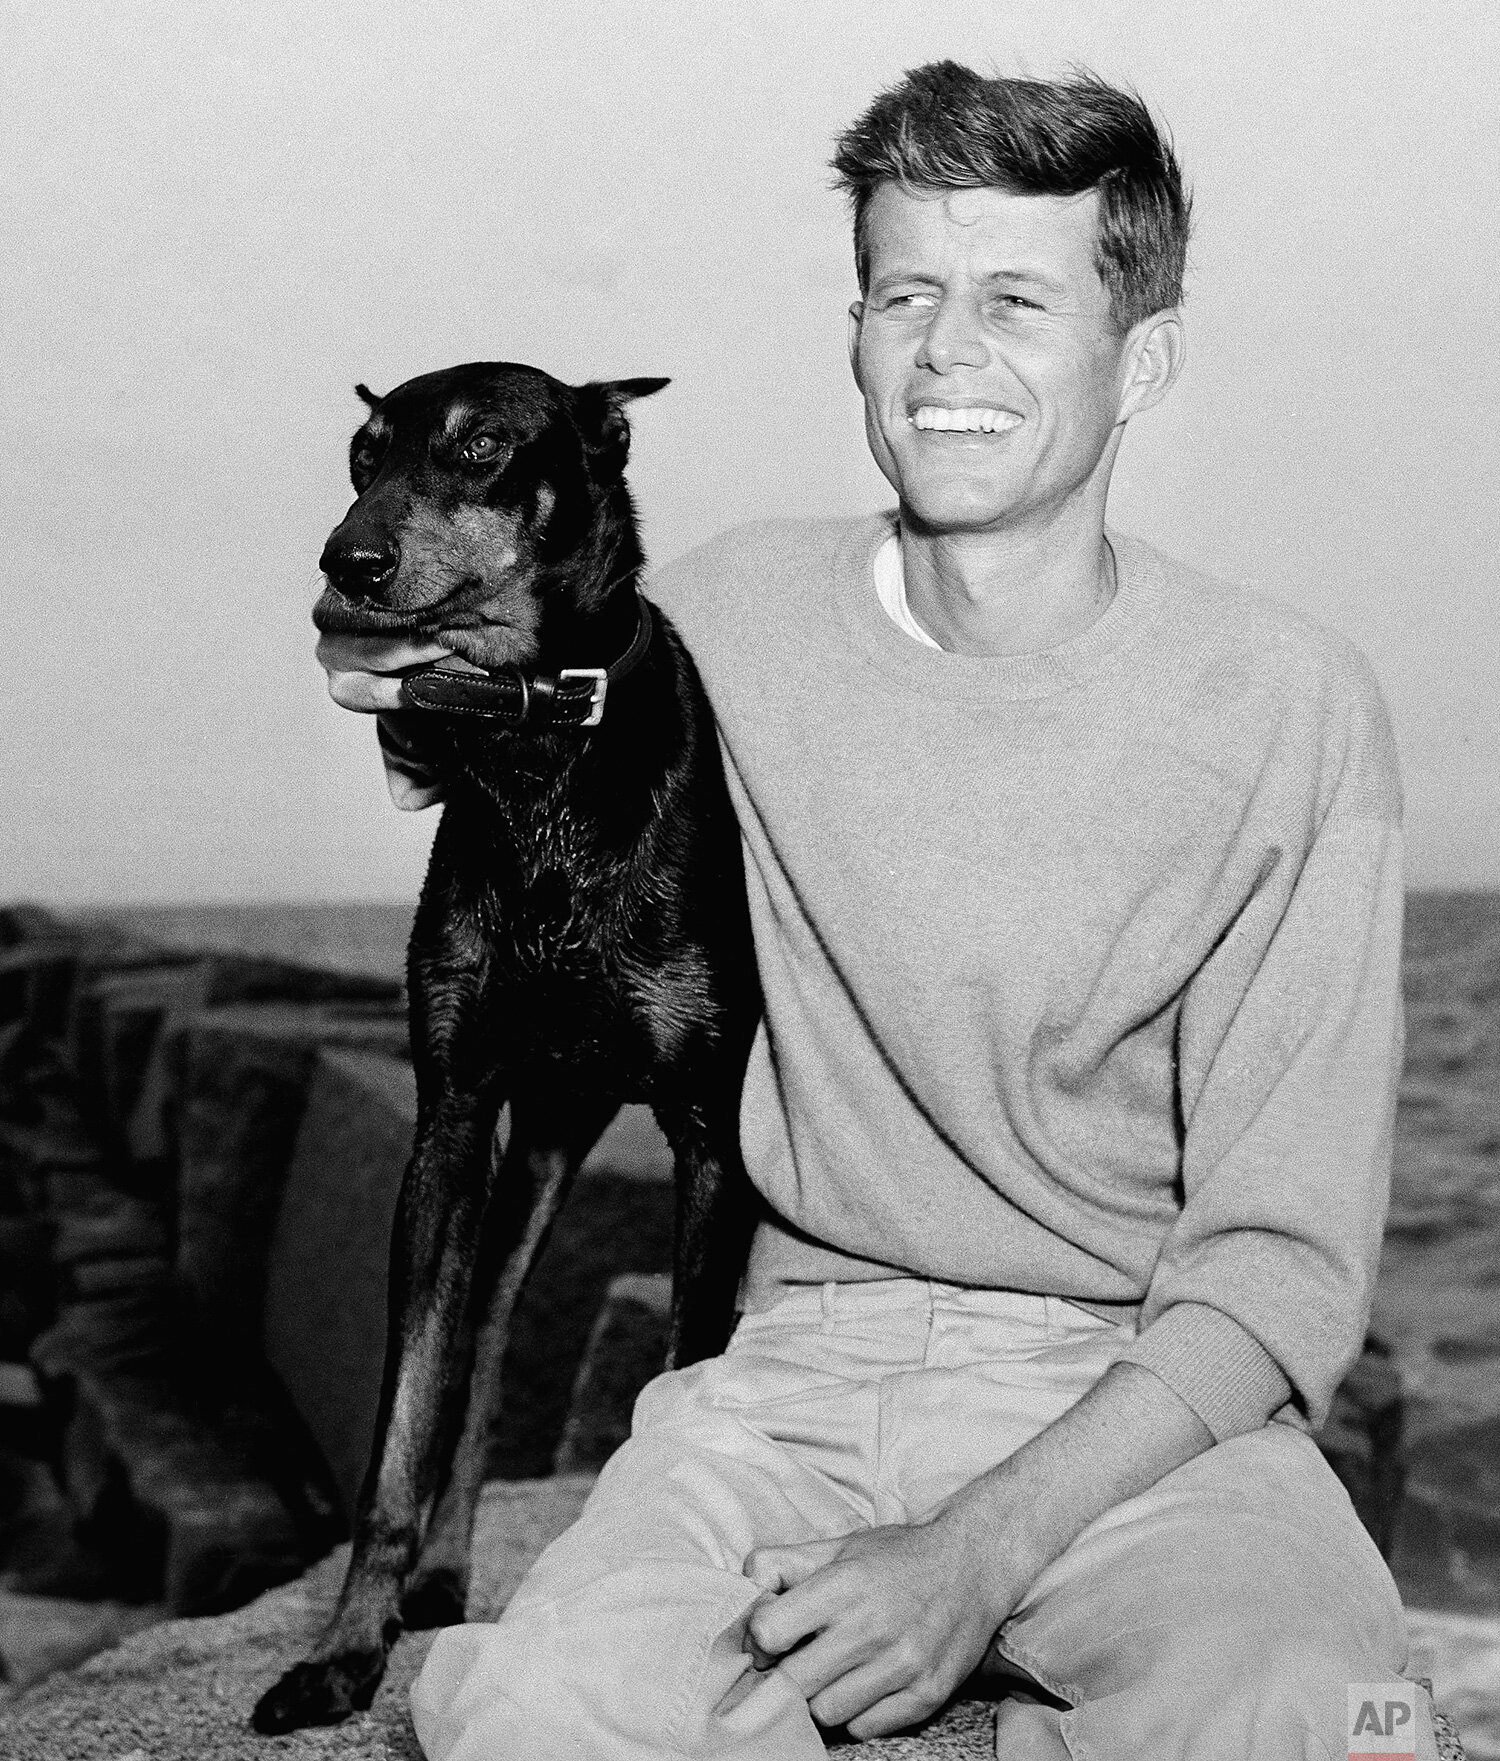  John F. Kennedy, winner of the Democratic Nomination for Congress in the 11th Massachusetts District, relaxes with his dog, Mo, in Hyannisport, Mass, June 22, 1946. (AP Photo/Peter J. Carroll) 